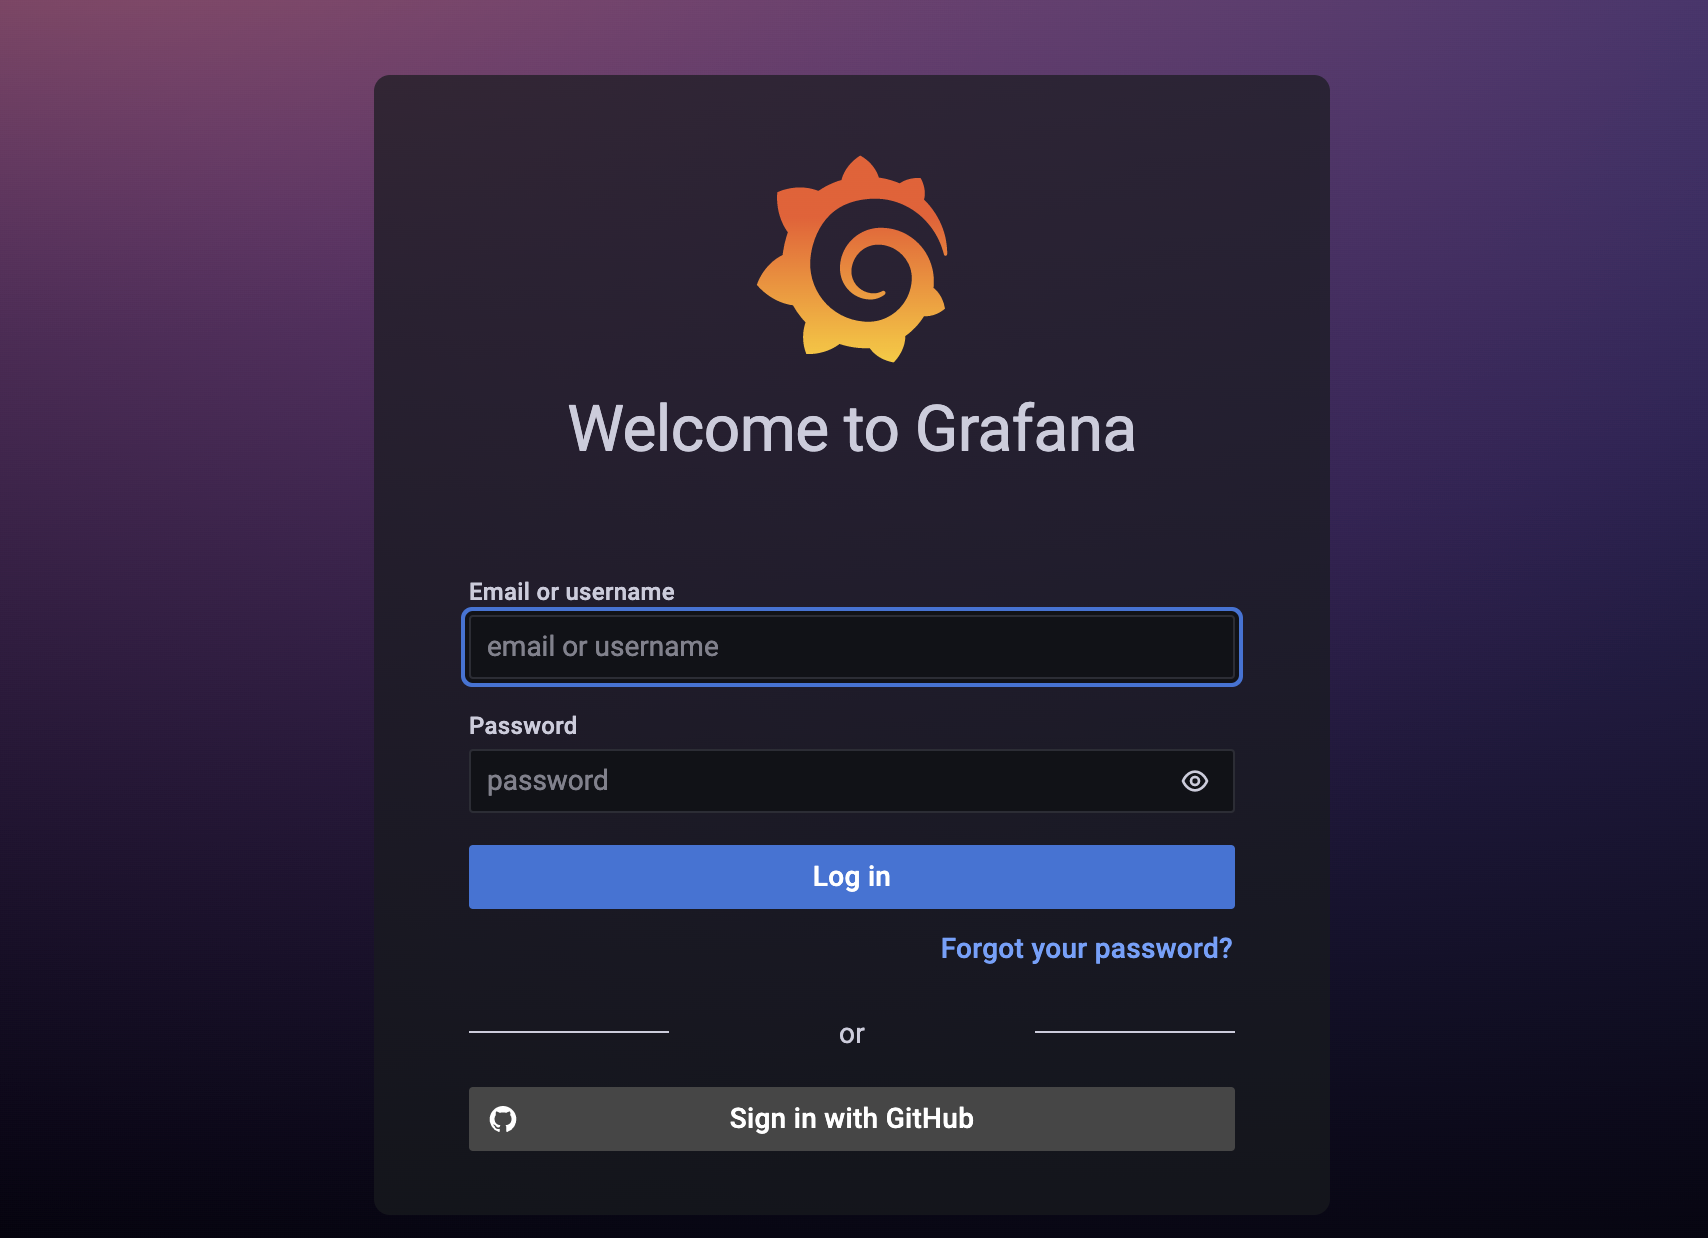 Grafana login page, now showing option to sign in with GitHub